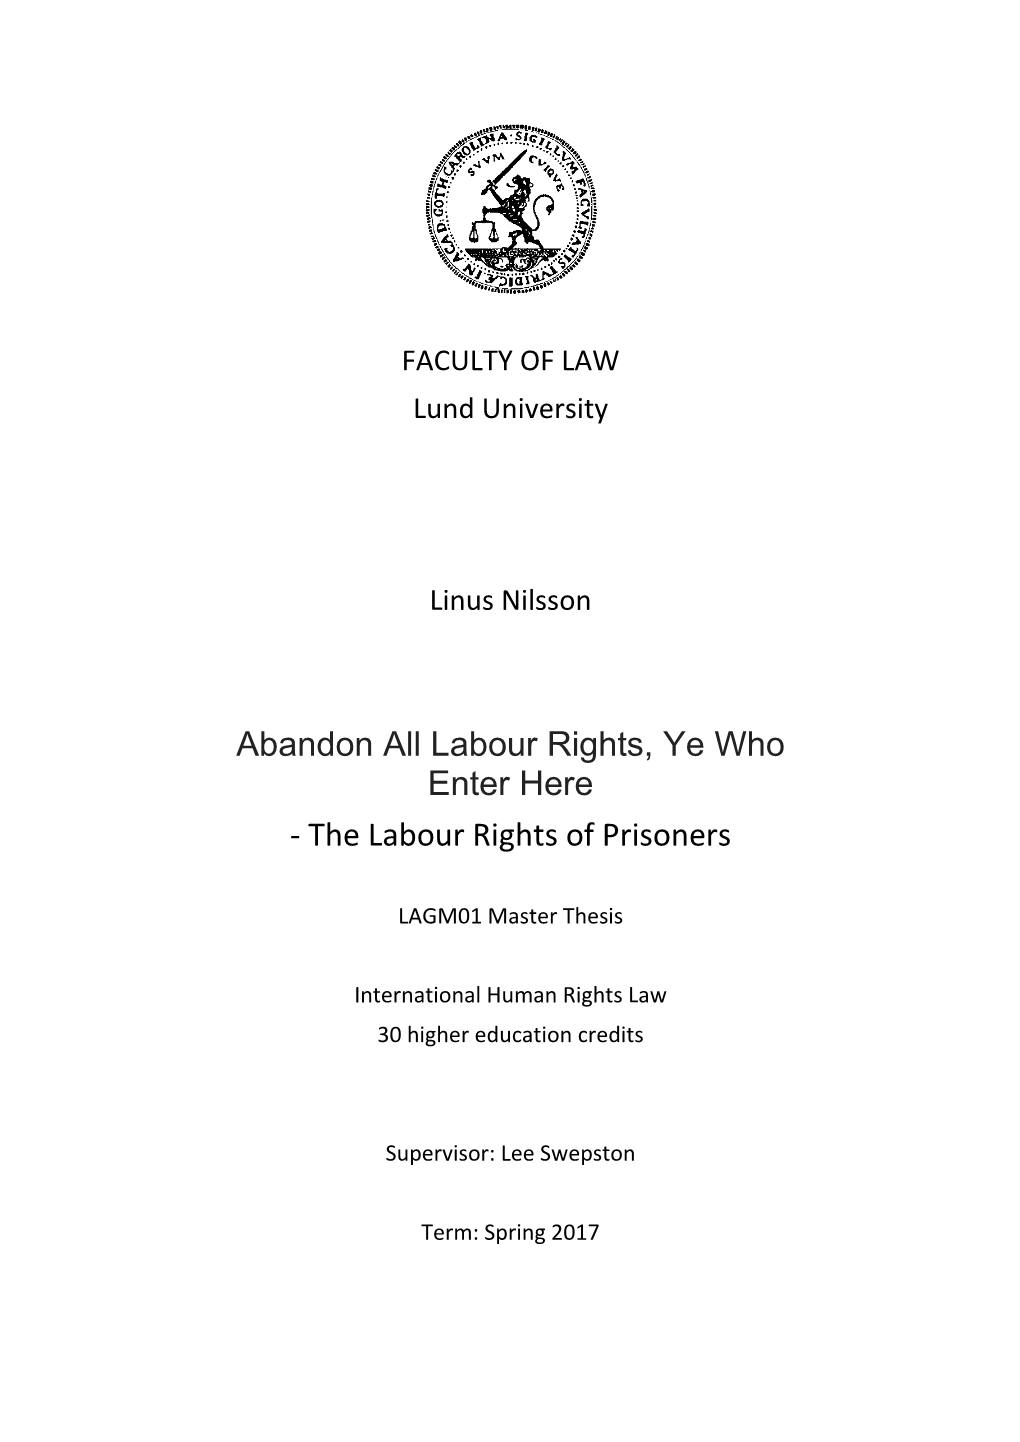 The Labour Rights of Prisoners